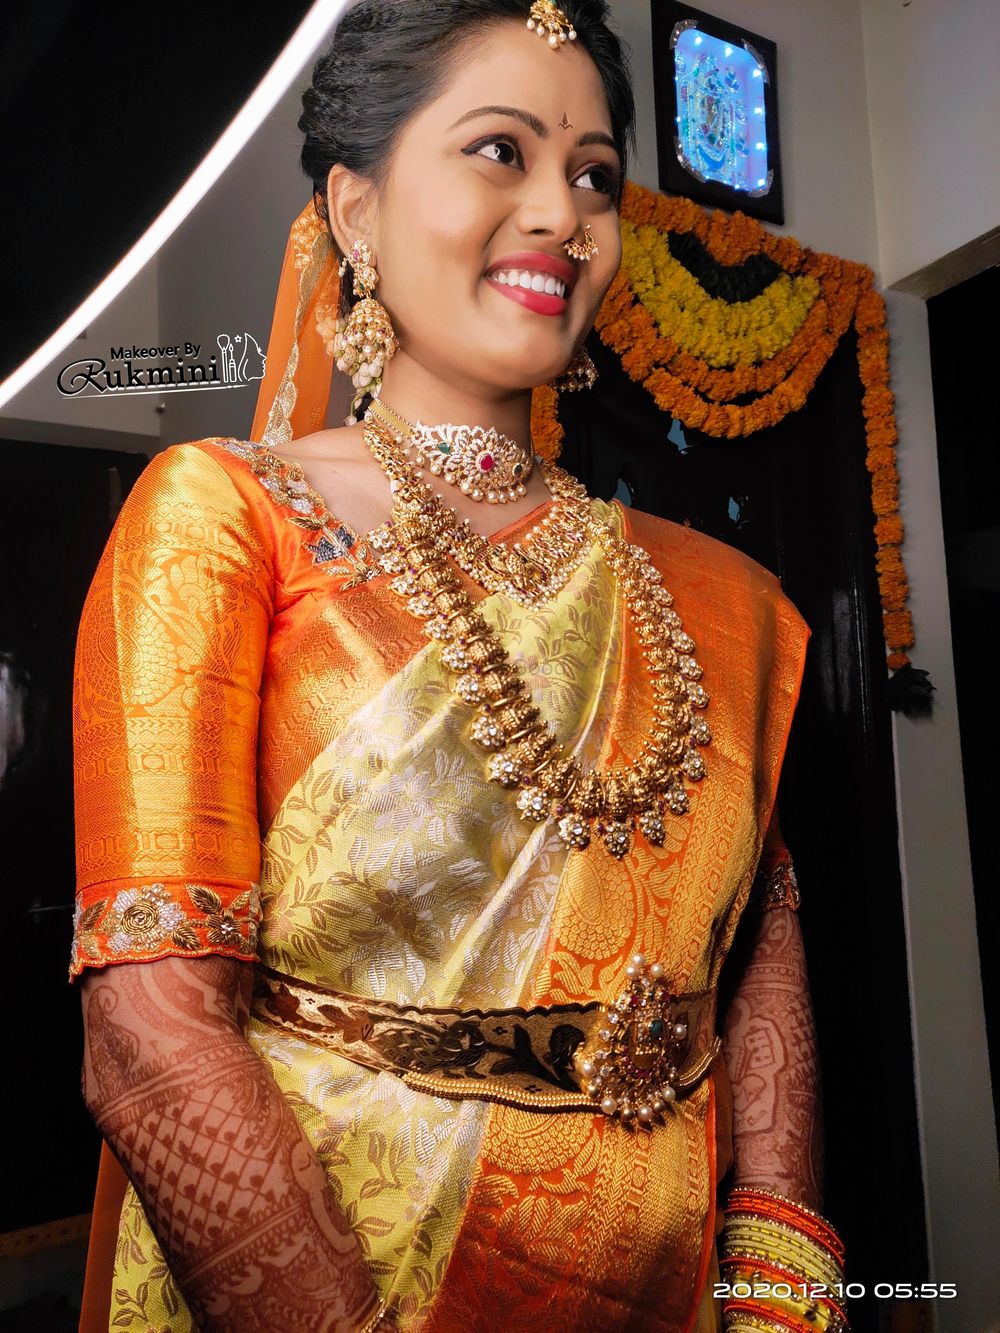 Photo From Wedding - By Makeover by Rukmini Kiran